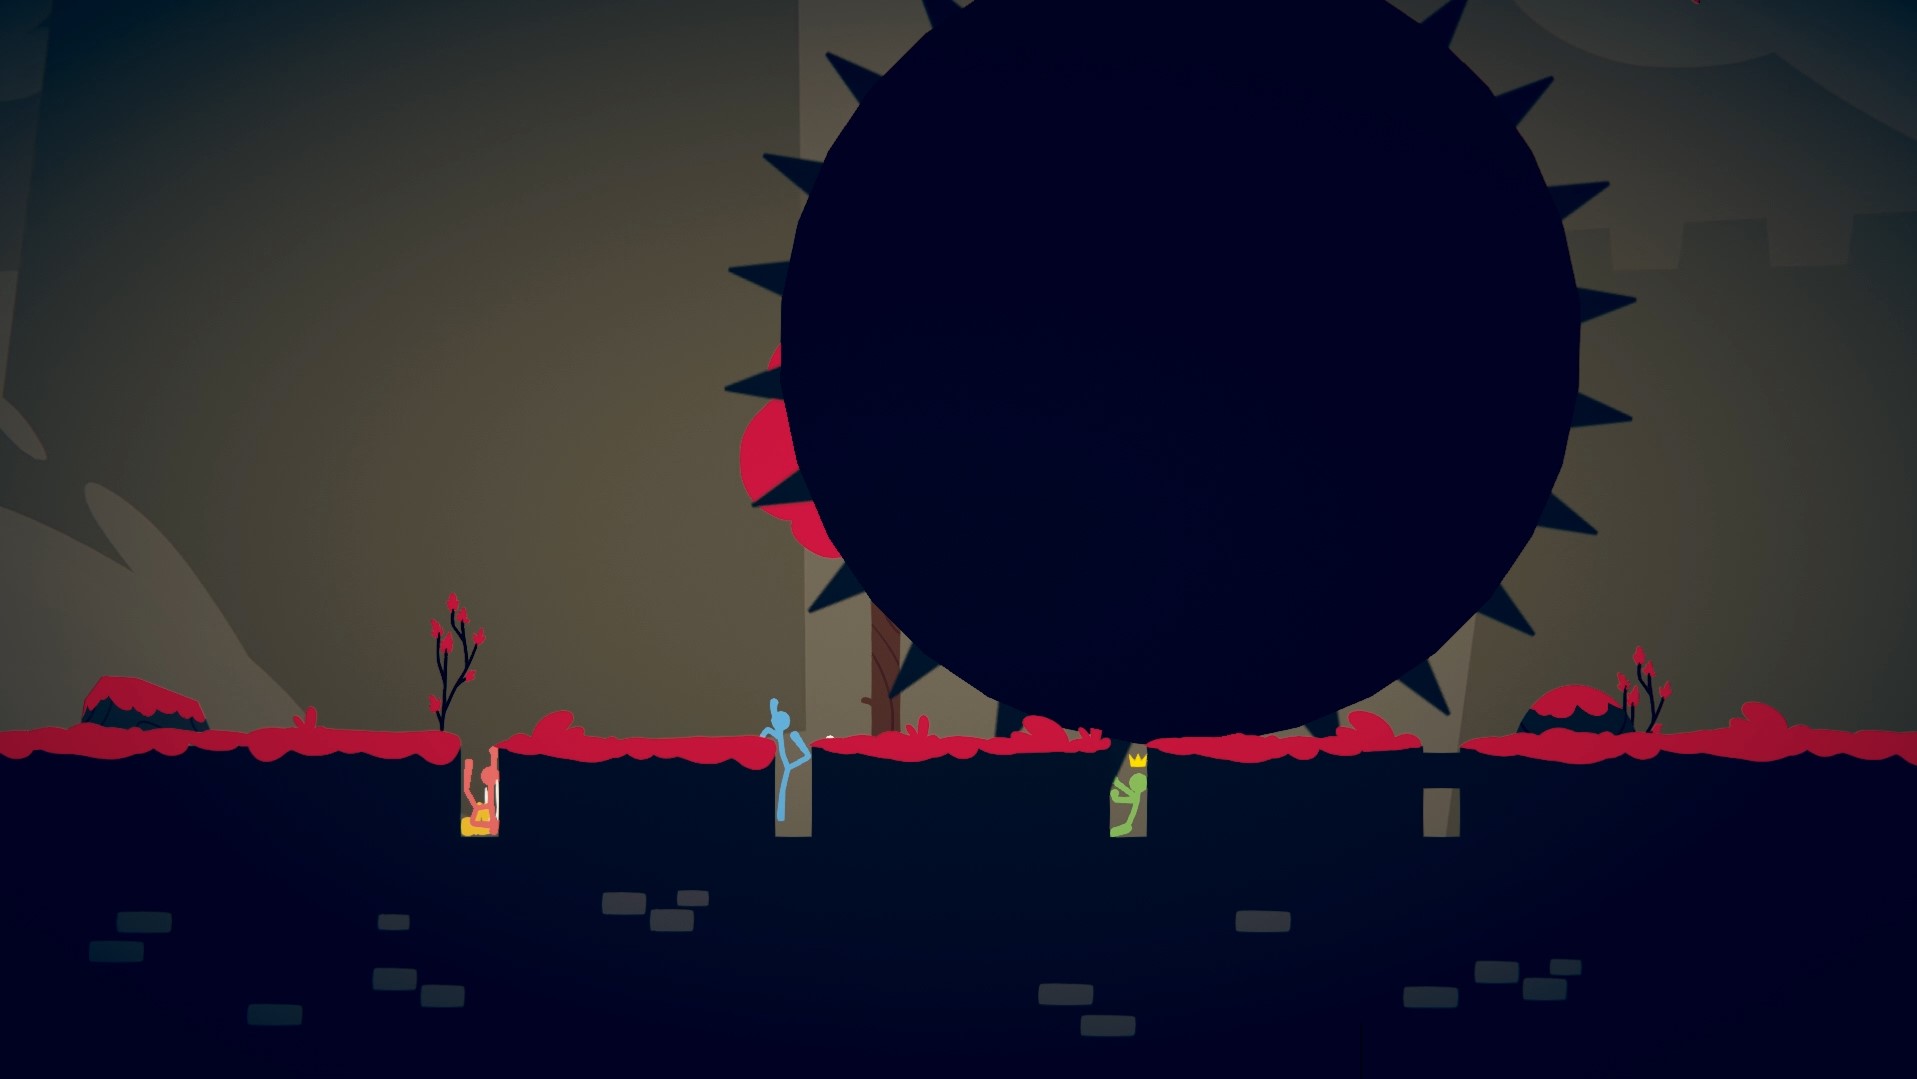 THIS GAME IS EPIC! - Stick Fight The Game 